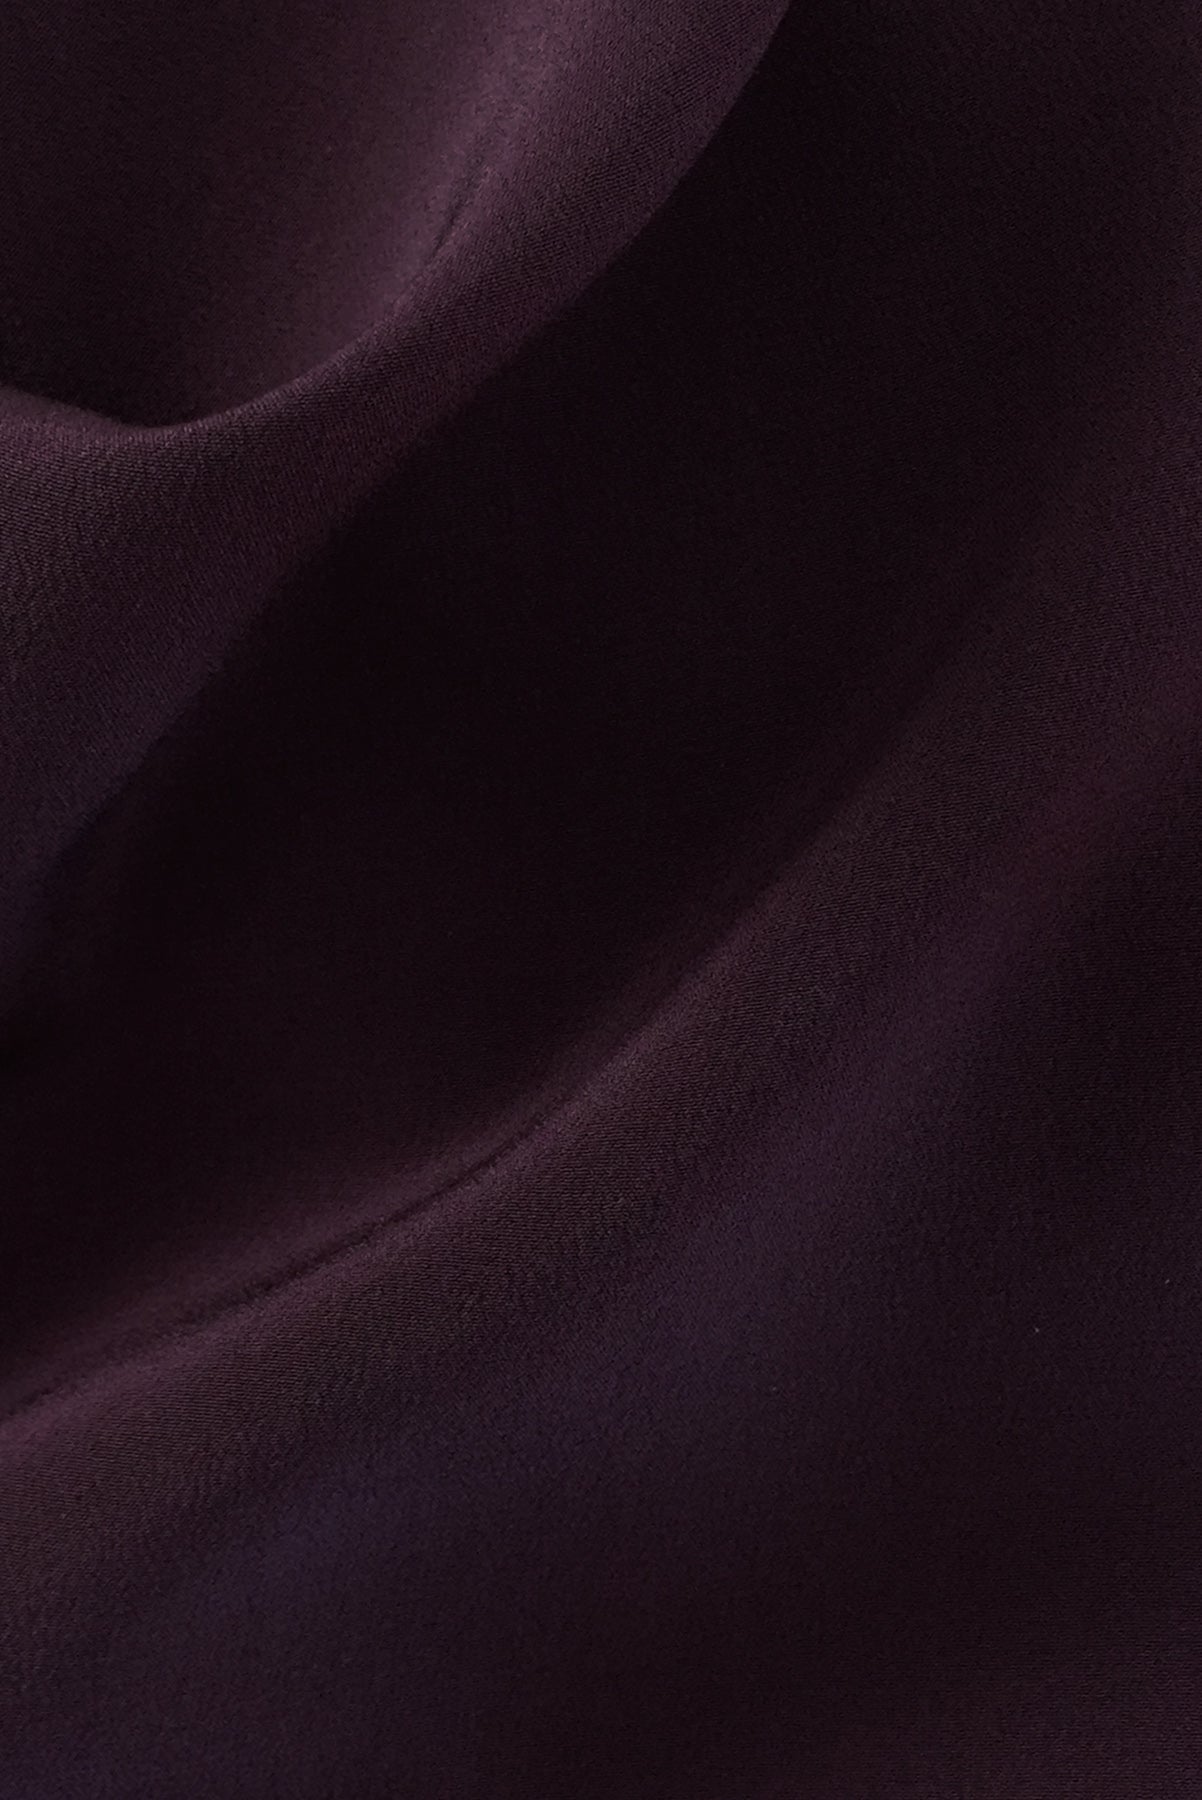 Oyster Gown - Aubergine - LOCLAIRE